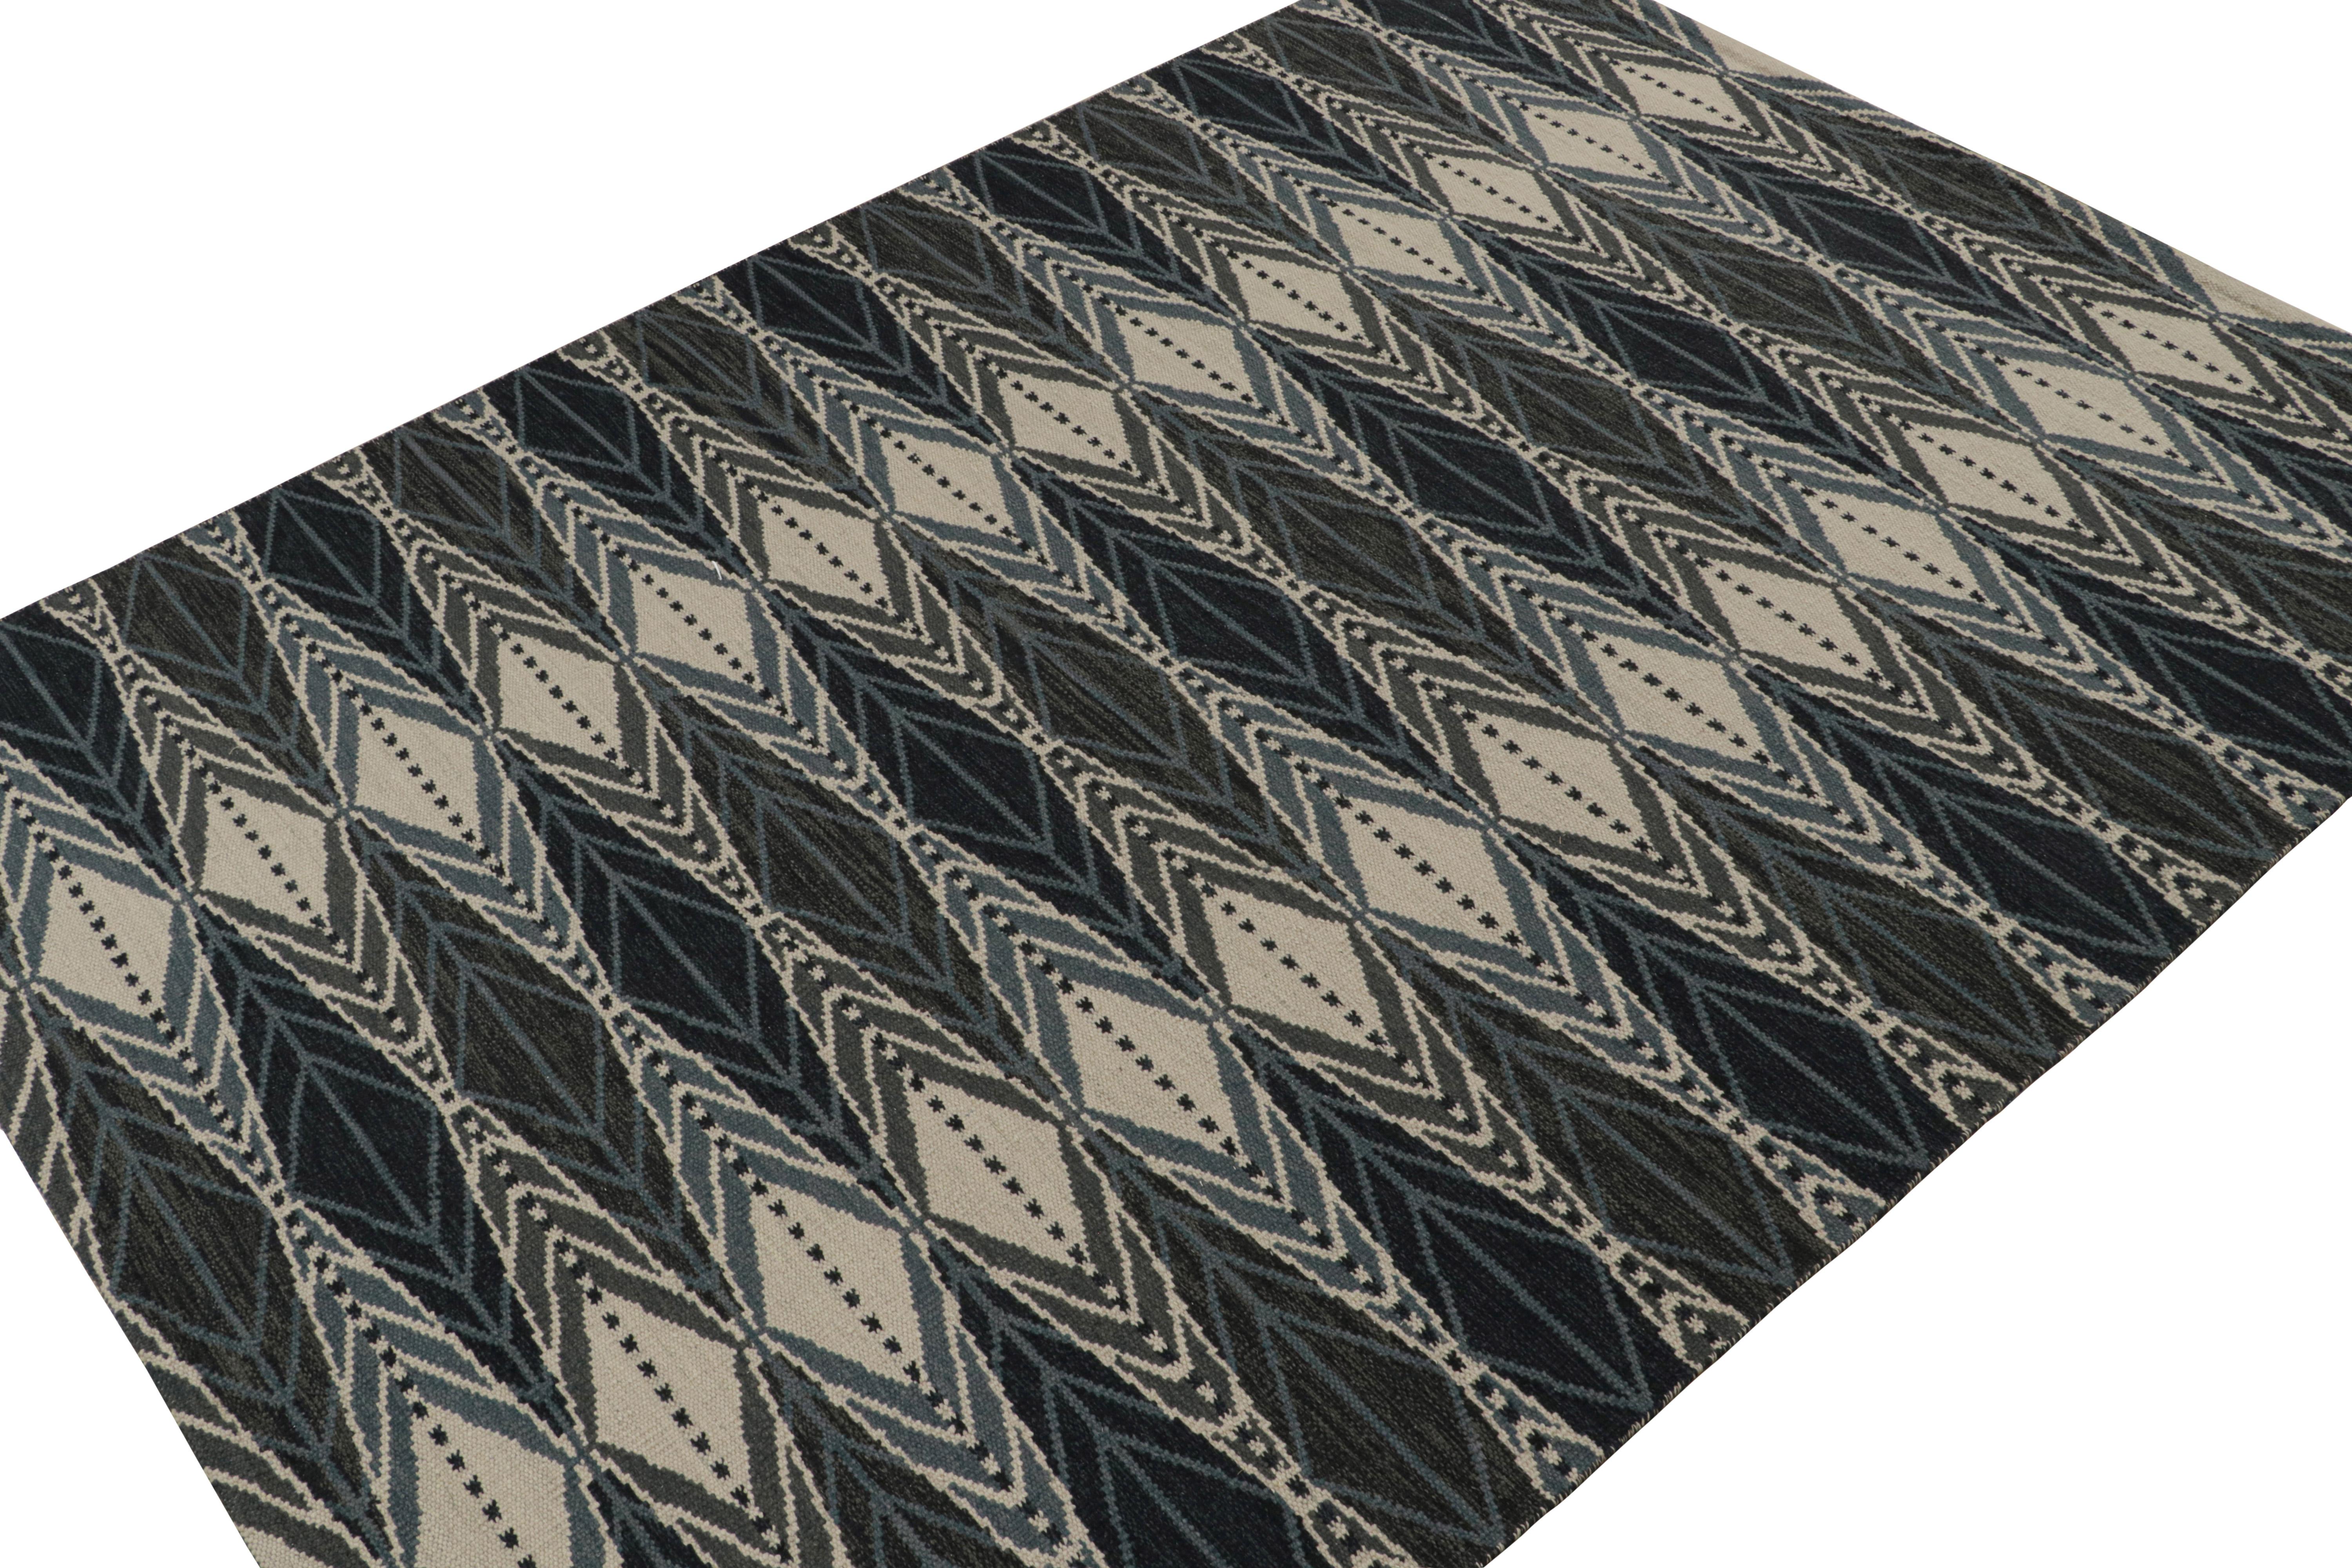 This custom Swedish Kilim rug design is from the flatweaves in the Scandinavian rug collection by Rug & Kilim. Handwoven in wool, cotton and natural yarns, its design is inspired by Rollakhan and Rya rugs in the Swedish Deco style. 

On the Design: